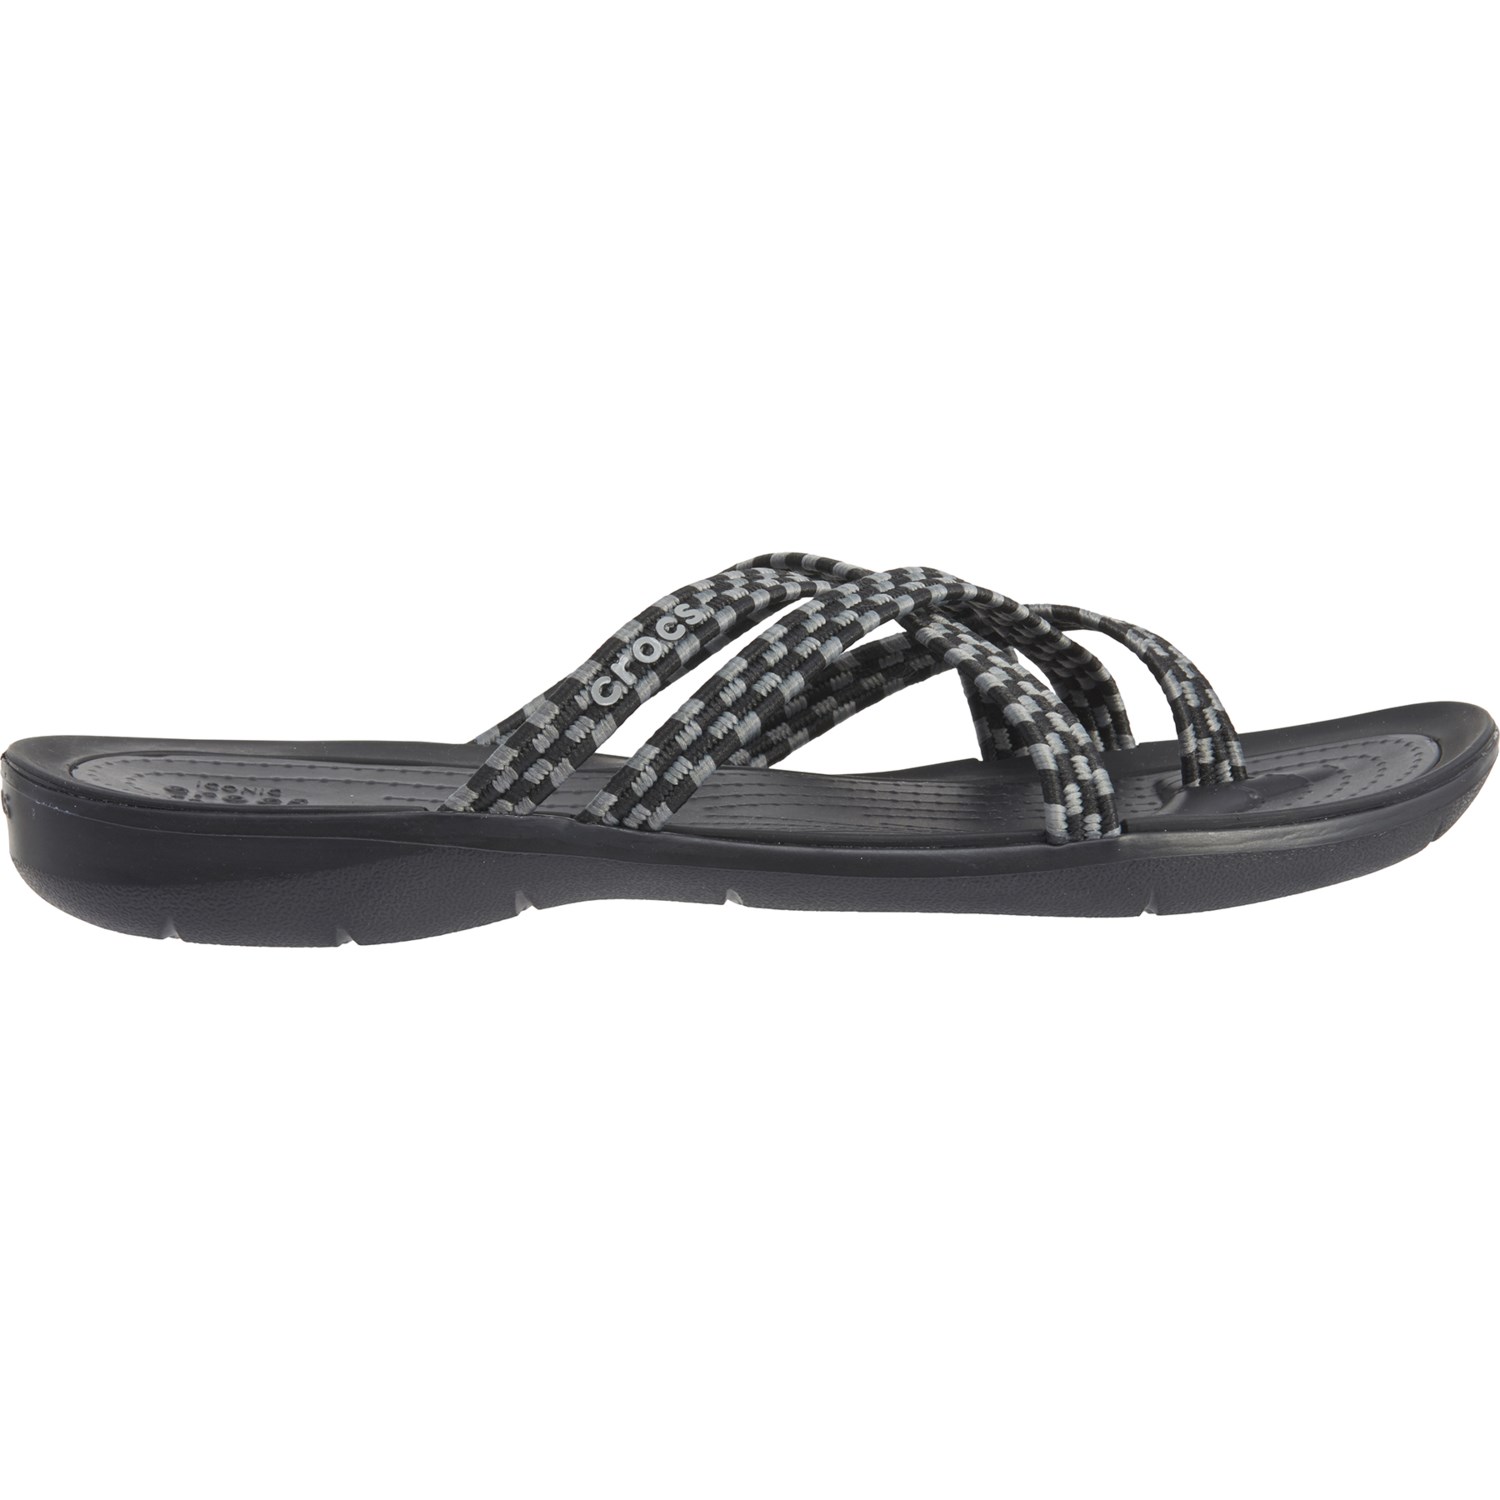 crocs swiftwater braided